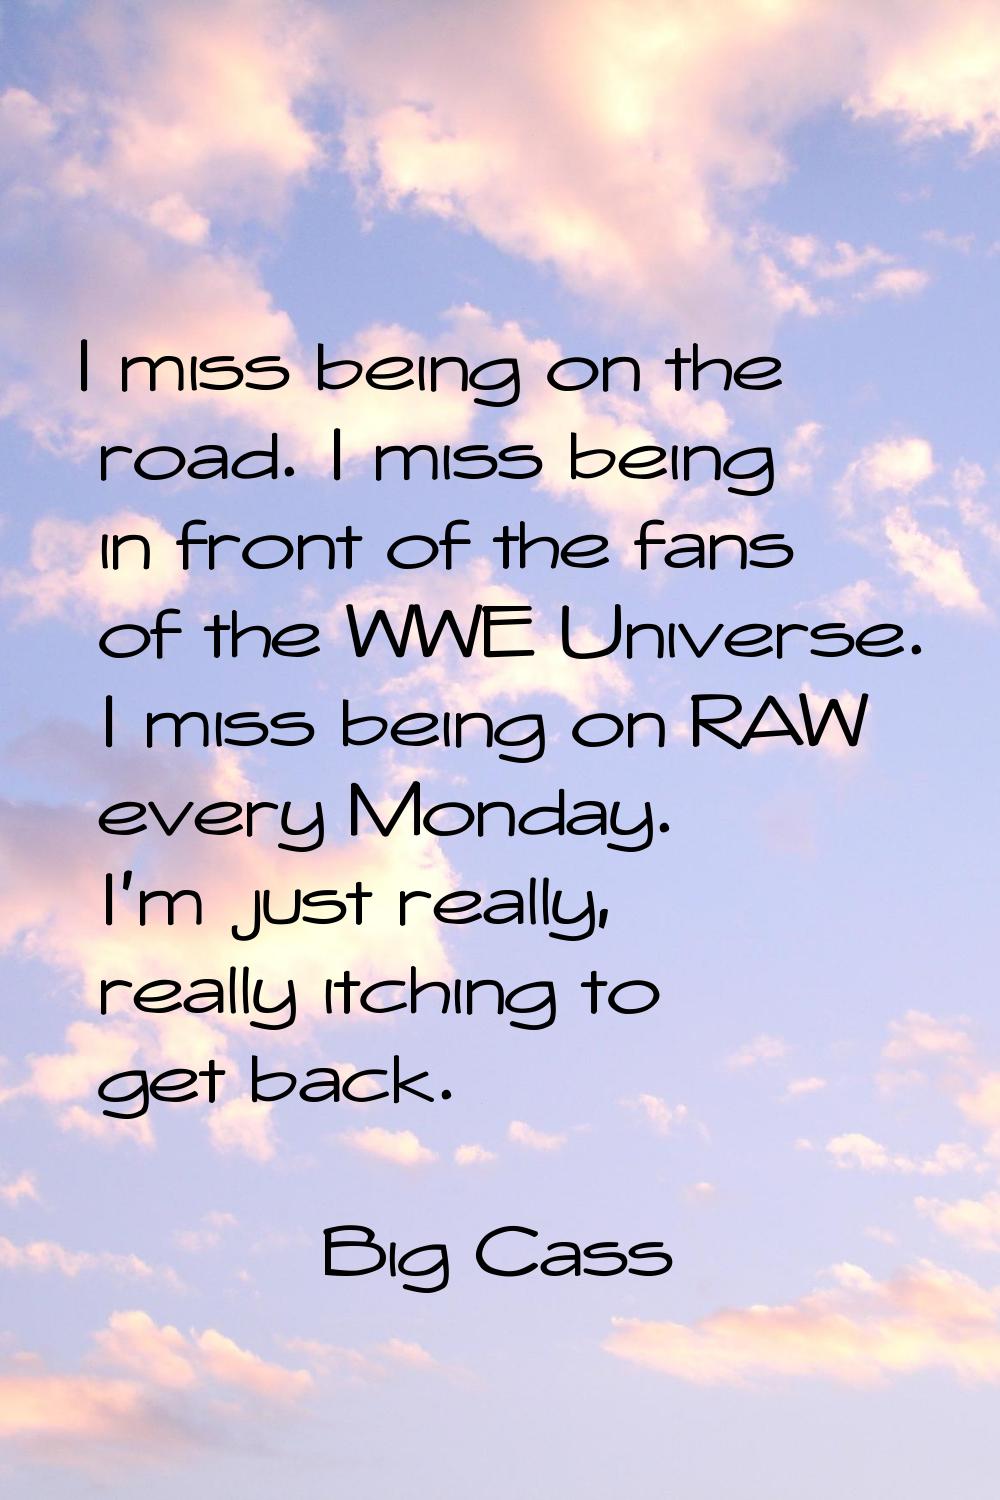 I miss being on the road. I miss being in front of the fans of the WWE Universe. I miss being on RA